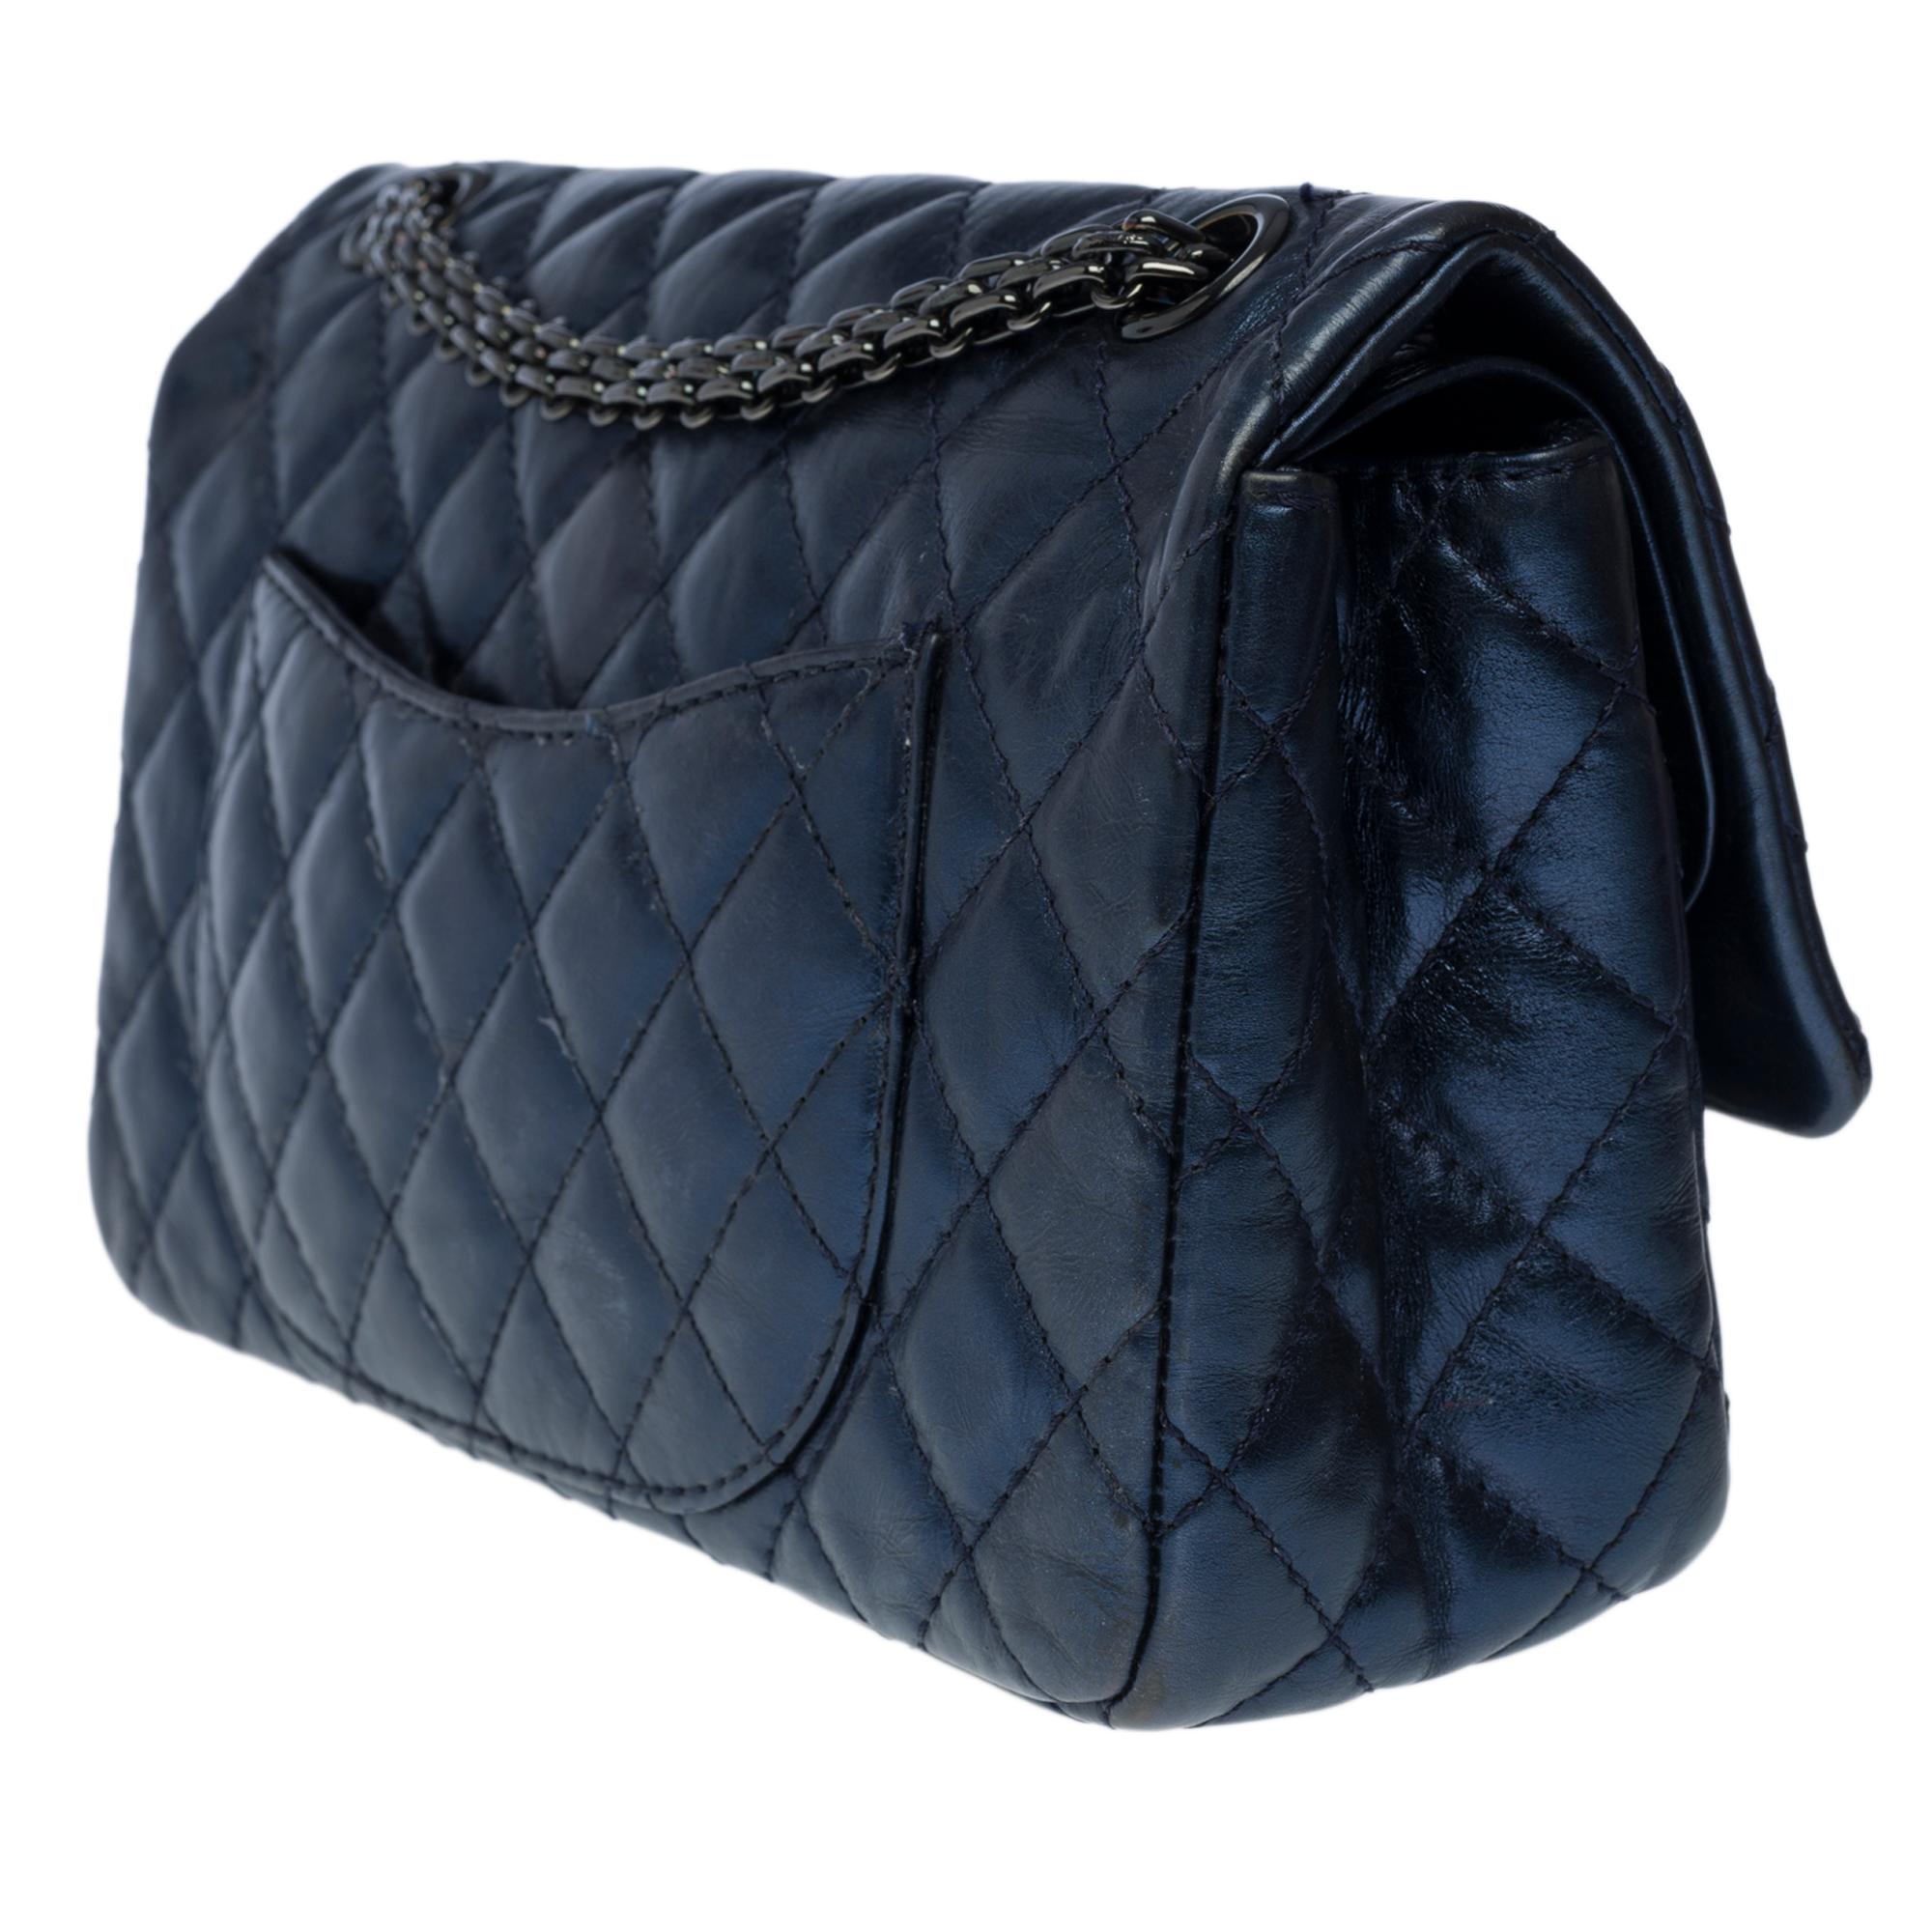 Black Chanel Classic 2.55 shoulder bag in metallic blue iridescent quilted leather, SHW